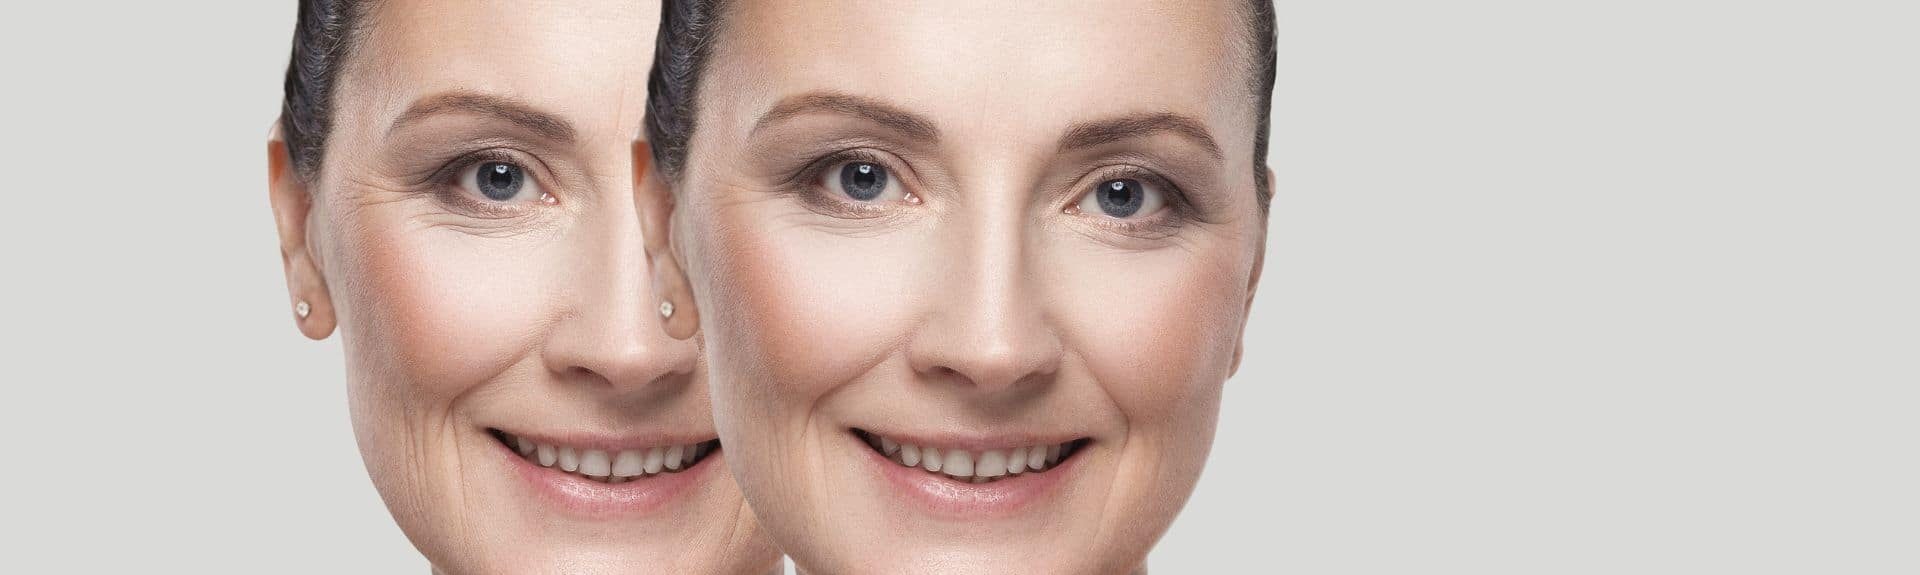 How Botox Works To Reduce The Appearance Of Wrinkles